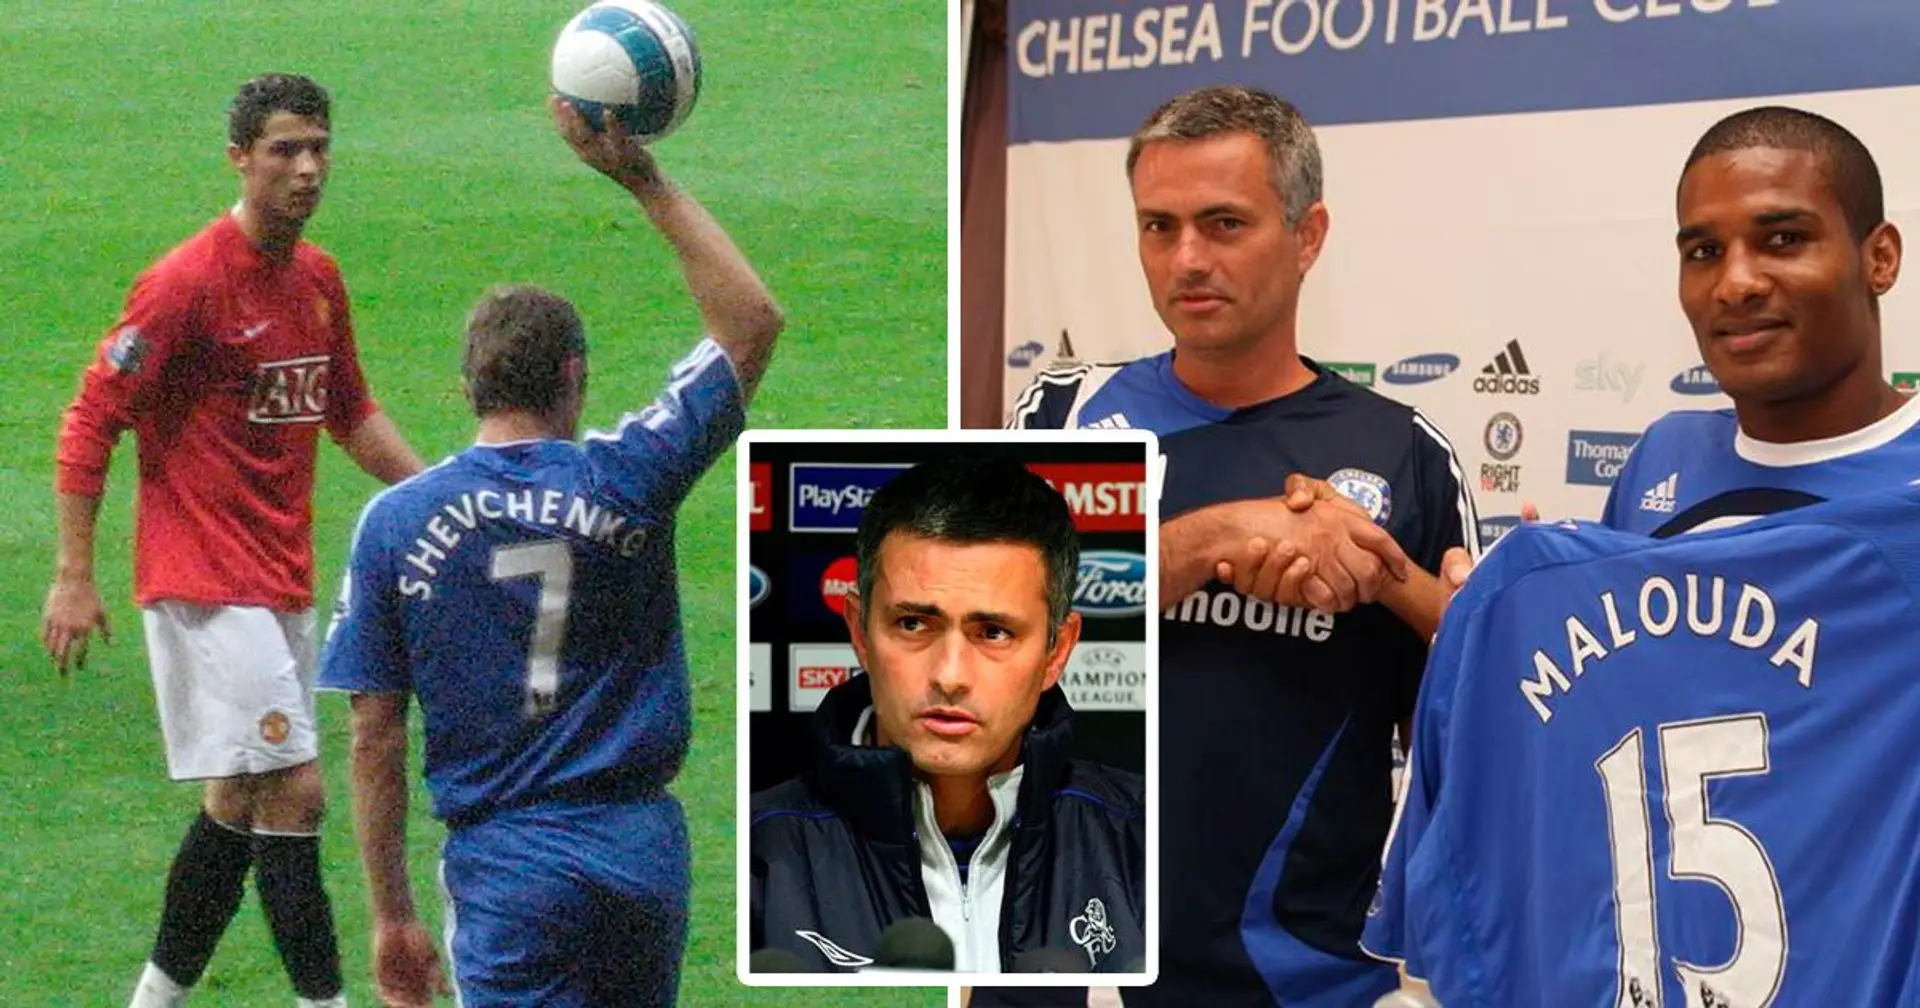 Florent Malouda recalls Jose Mourinho's reaction when he asked to wear the number 7 shirt at Chelsea